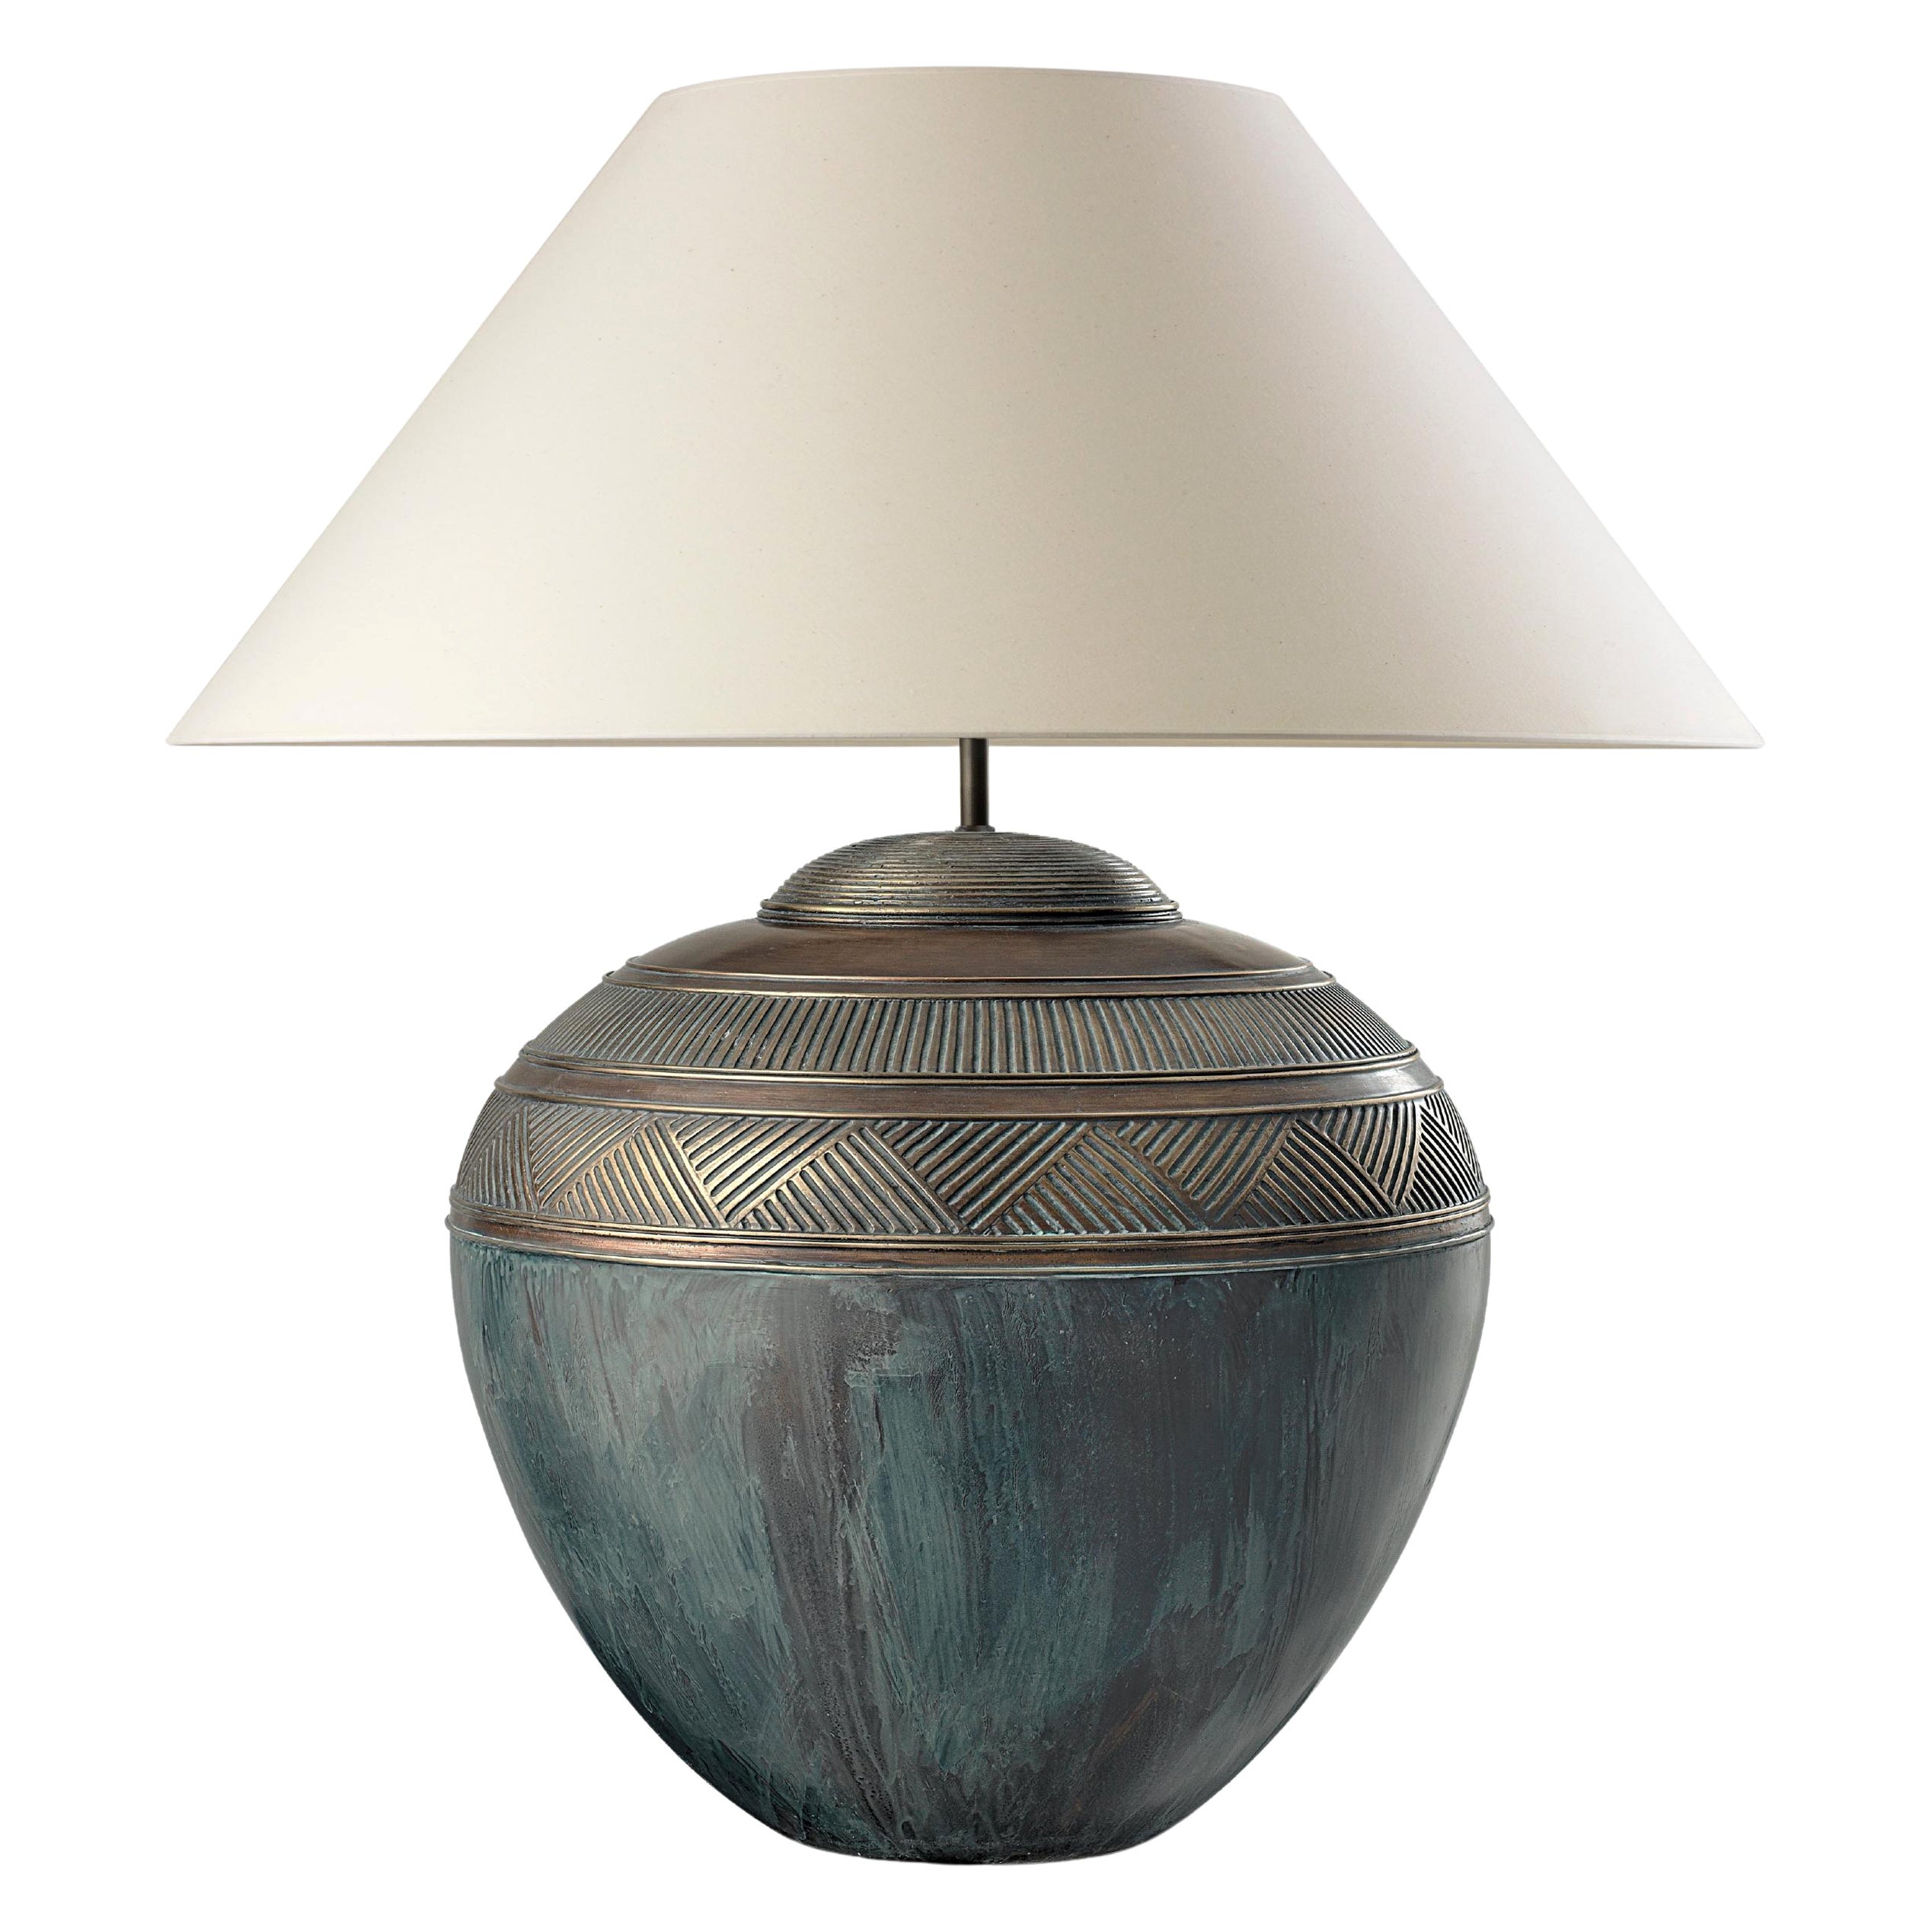 INCA, Table Lamp in Aged Bronze, Modern Art Deco Design Handmade, Shade Included For Sale